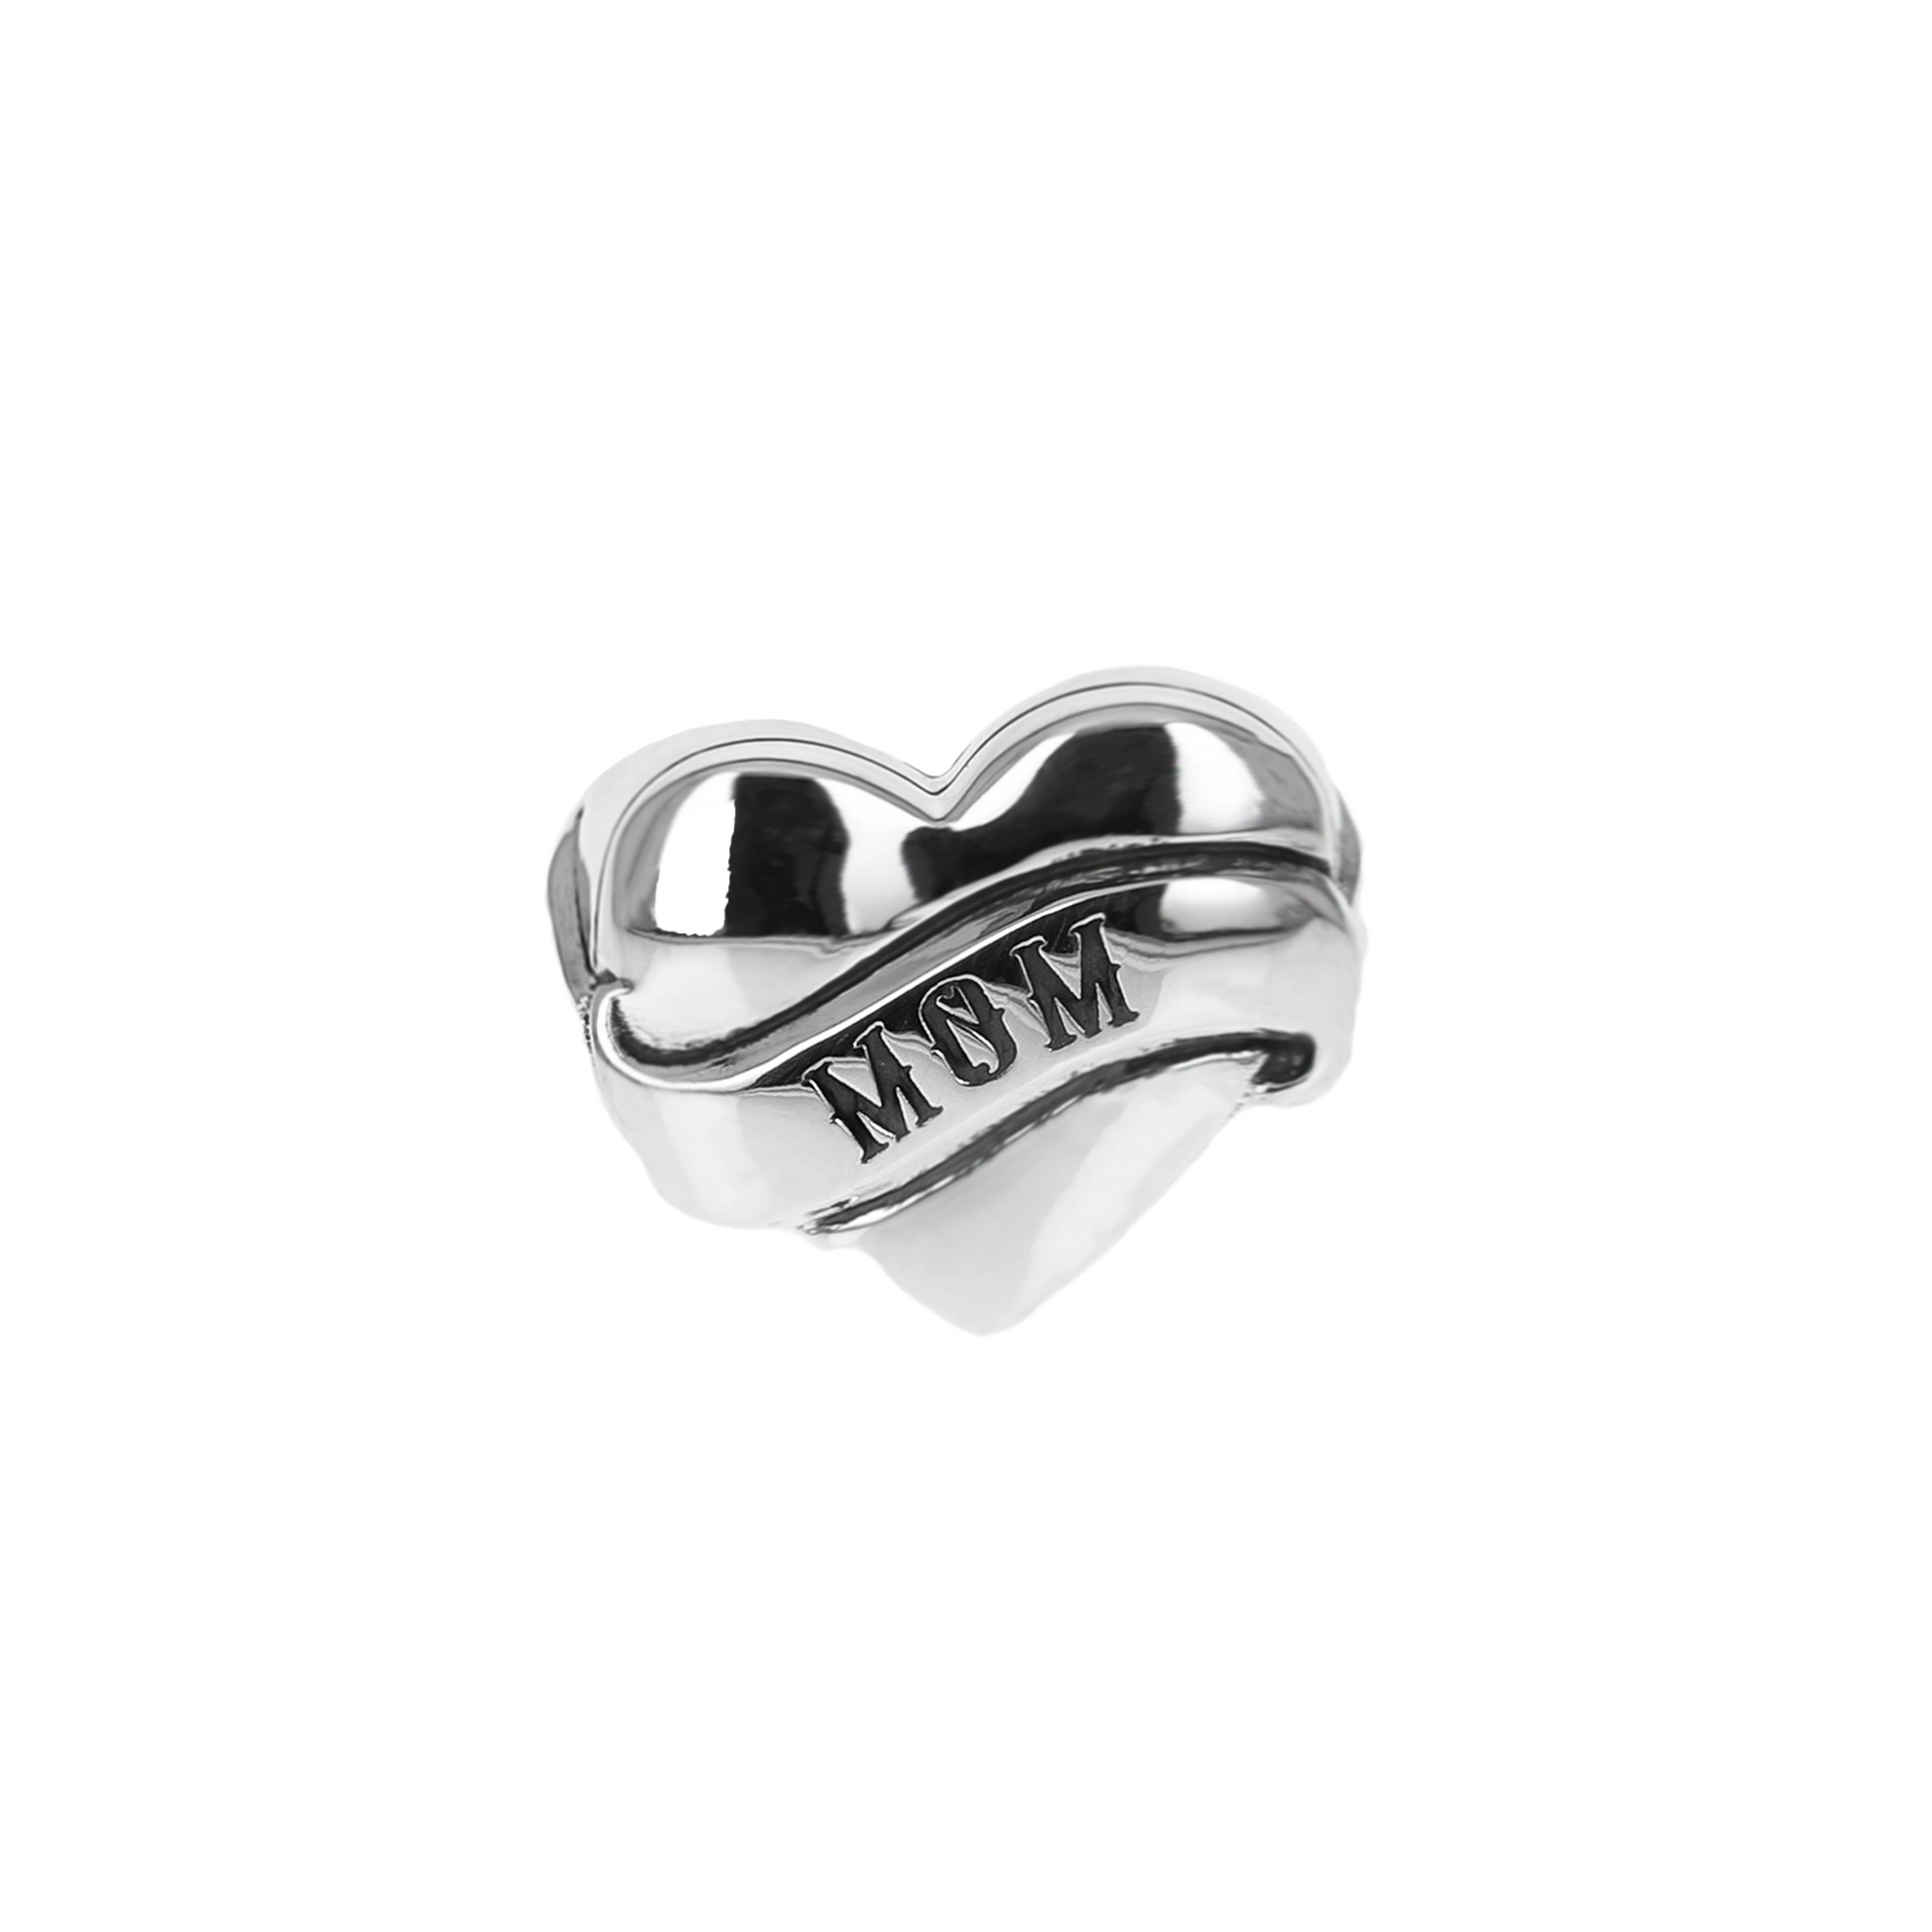 Tattoo Mom Heart Ring on white background